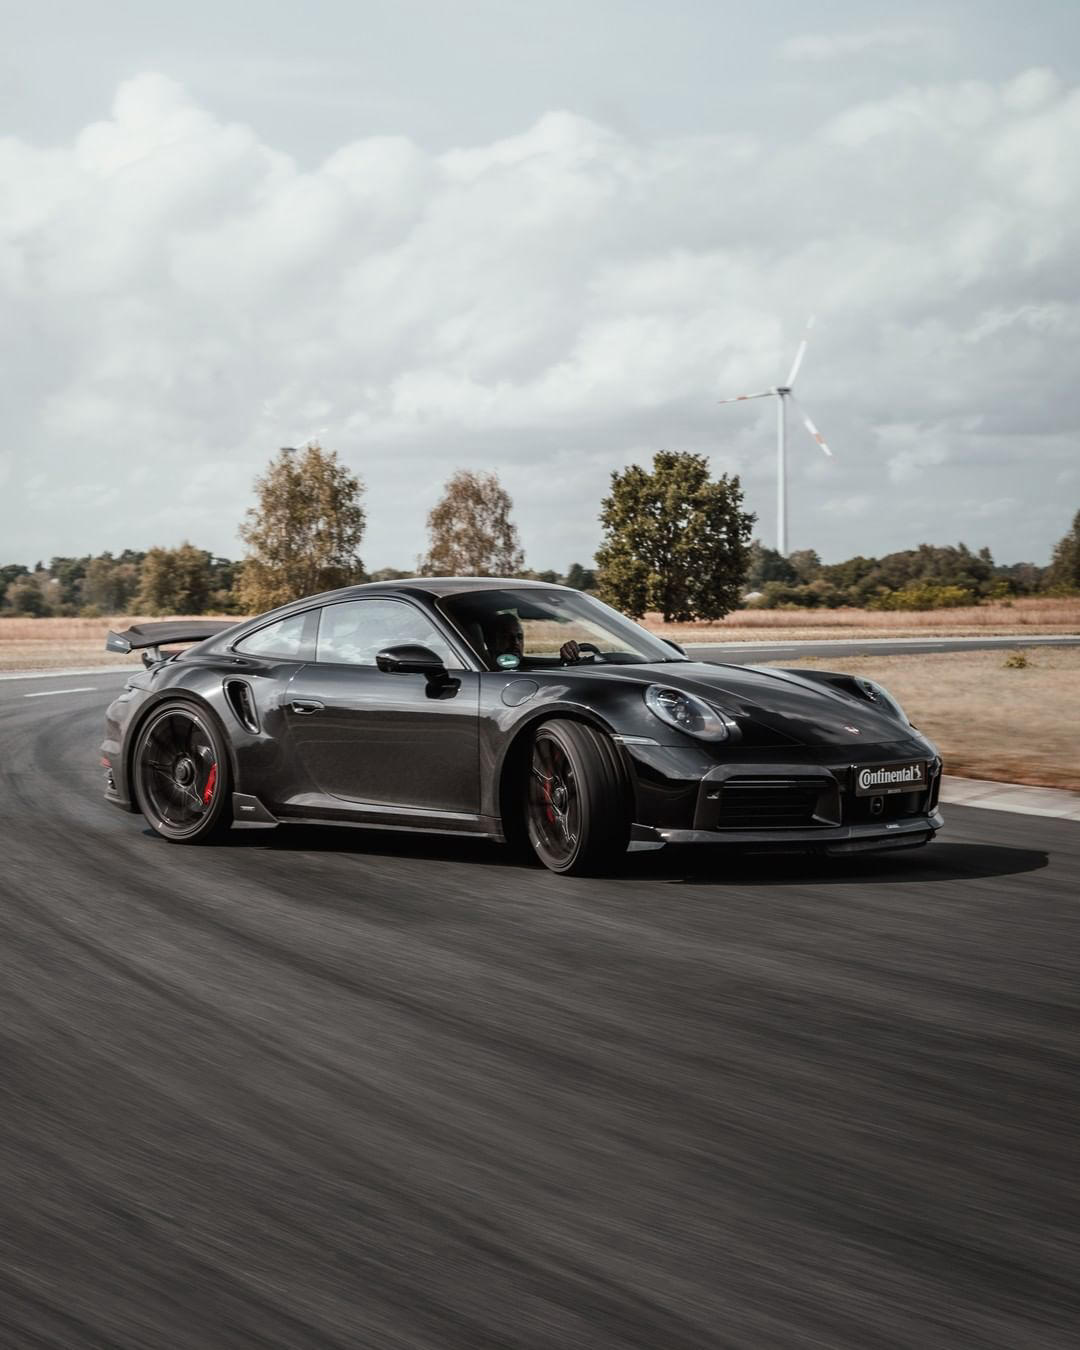 BRABUS - Sliding right into the weekend with the BRABUS 820, based on the Porsche 911 Turbo S Coupe